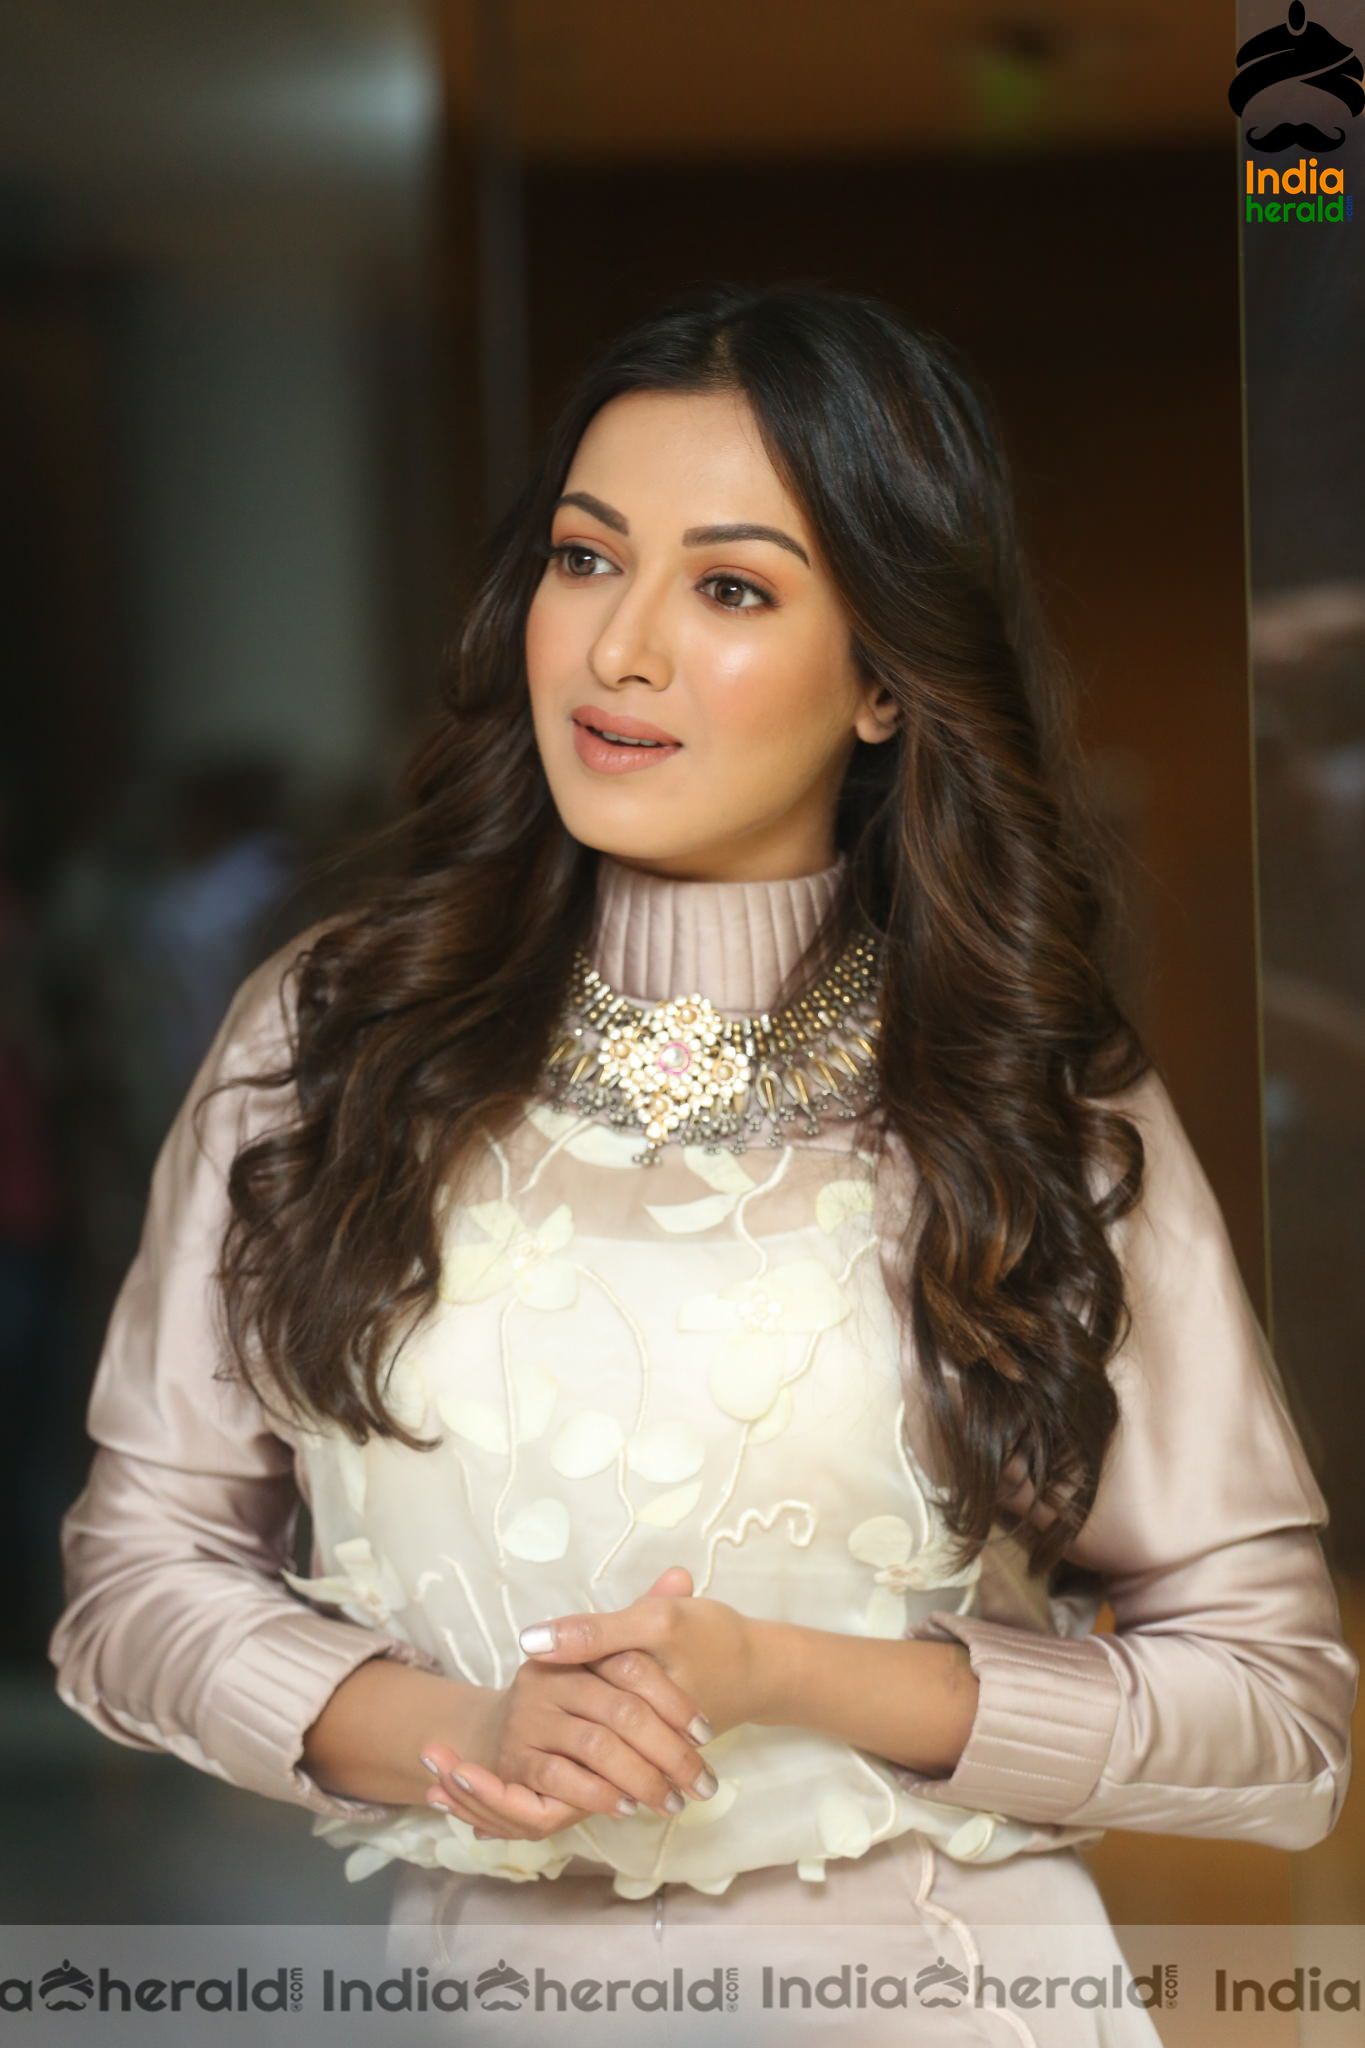 Catherine Tresa Looking Resplendent as an Angel in these Clicks